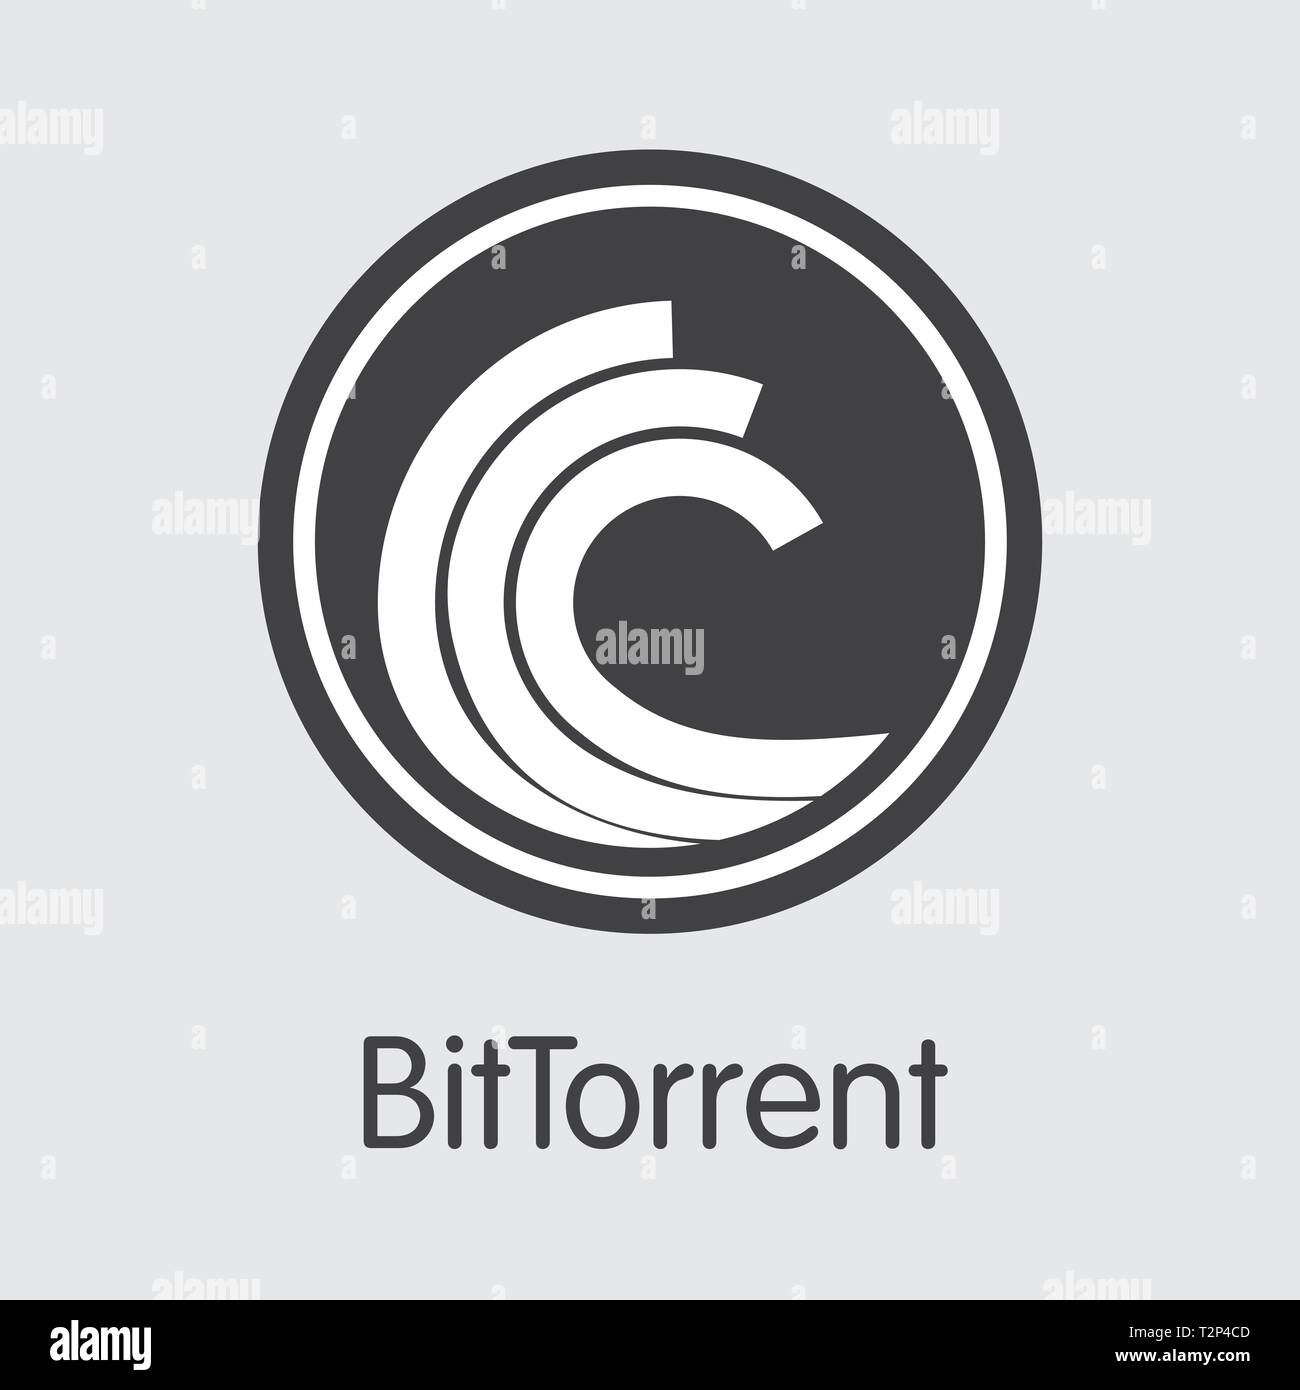 BTT - Bittorrent. The Logo or Emblem of Money, Market Emblem, ICOs Coins and Tokens Icon. Stock Vector